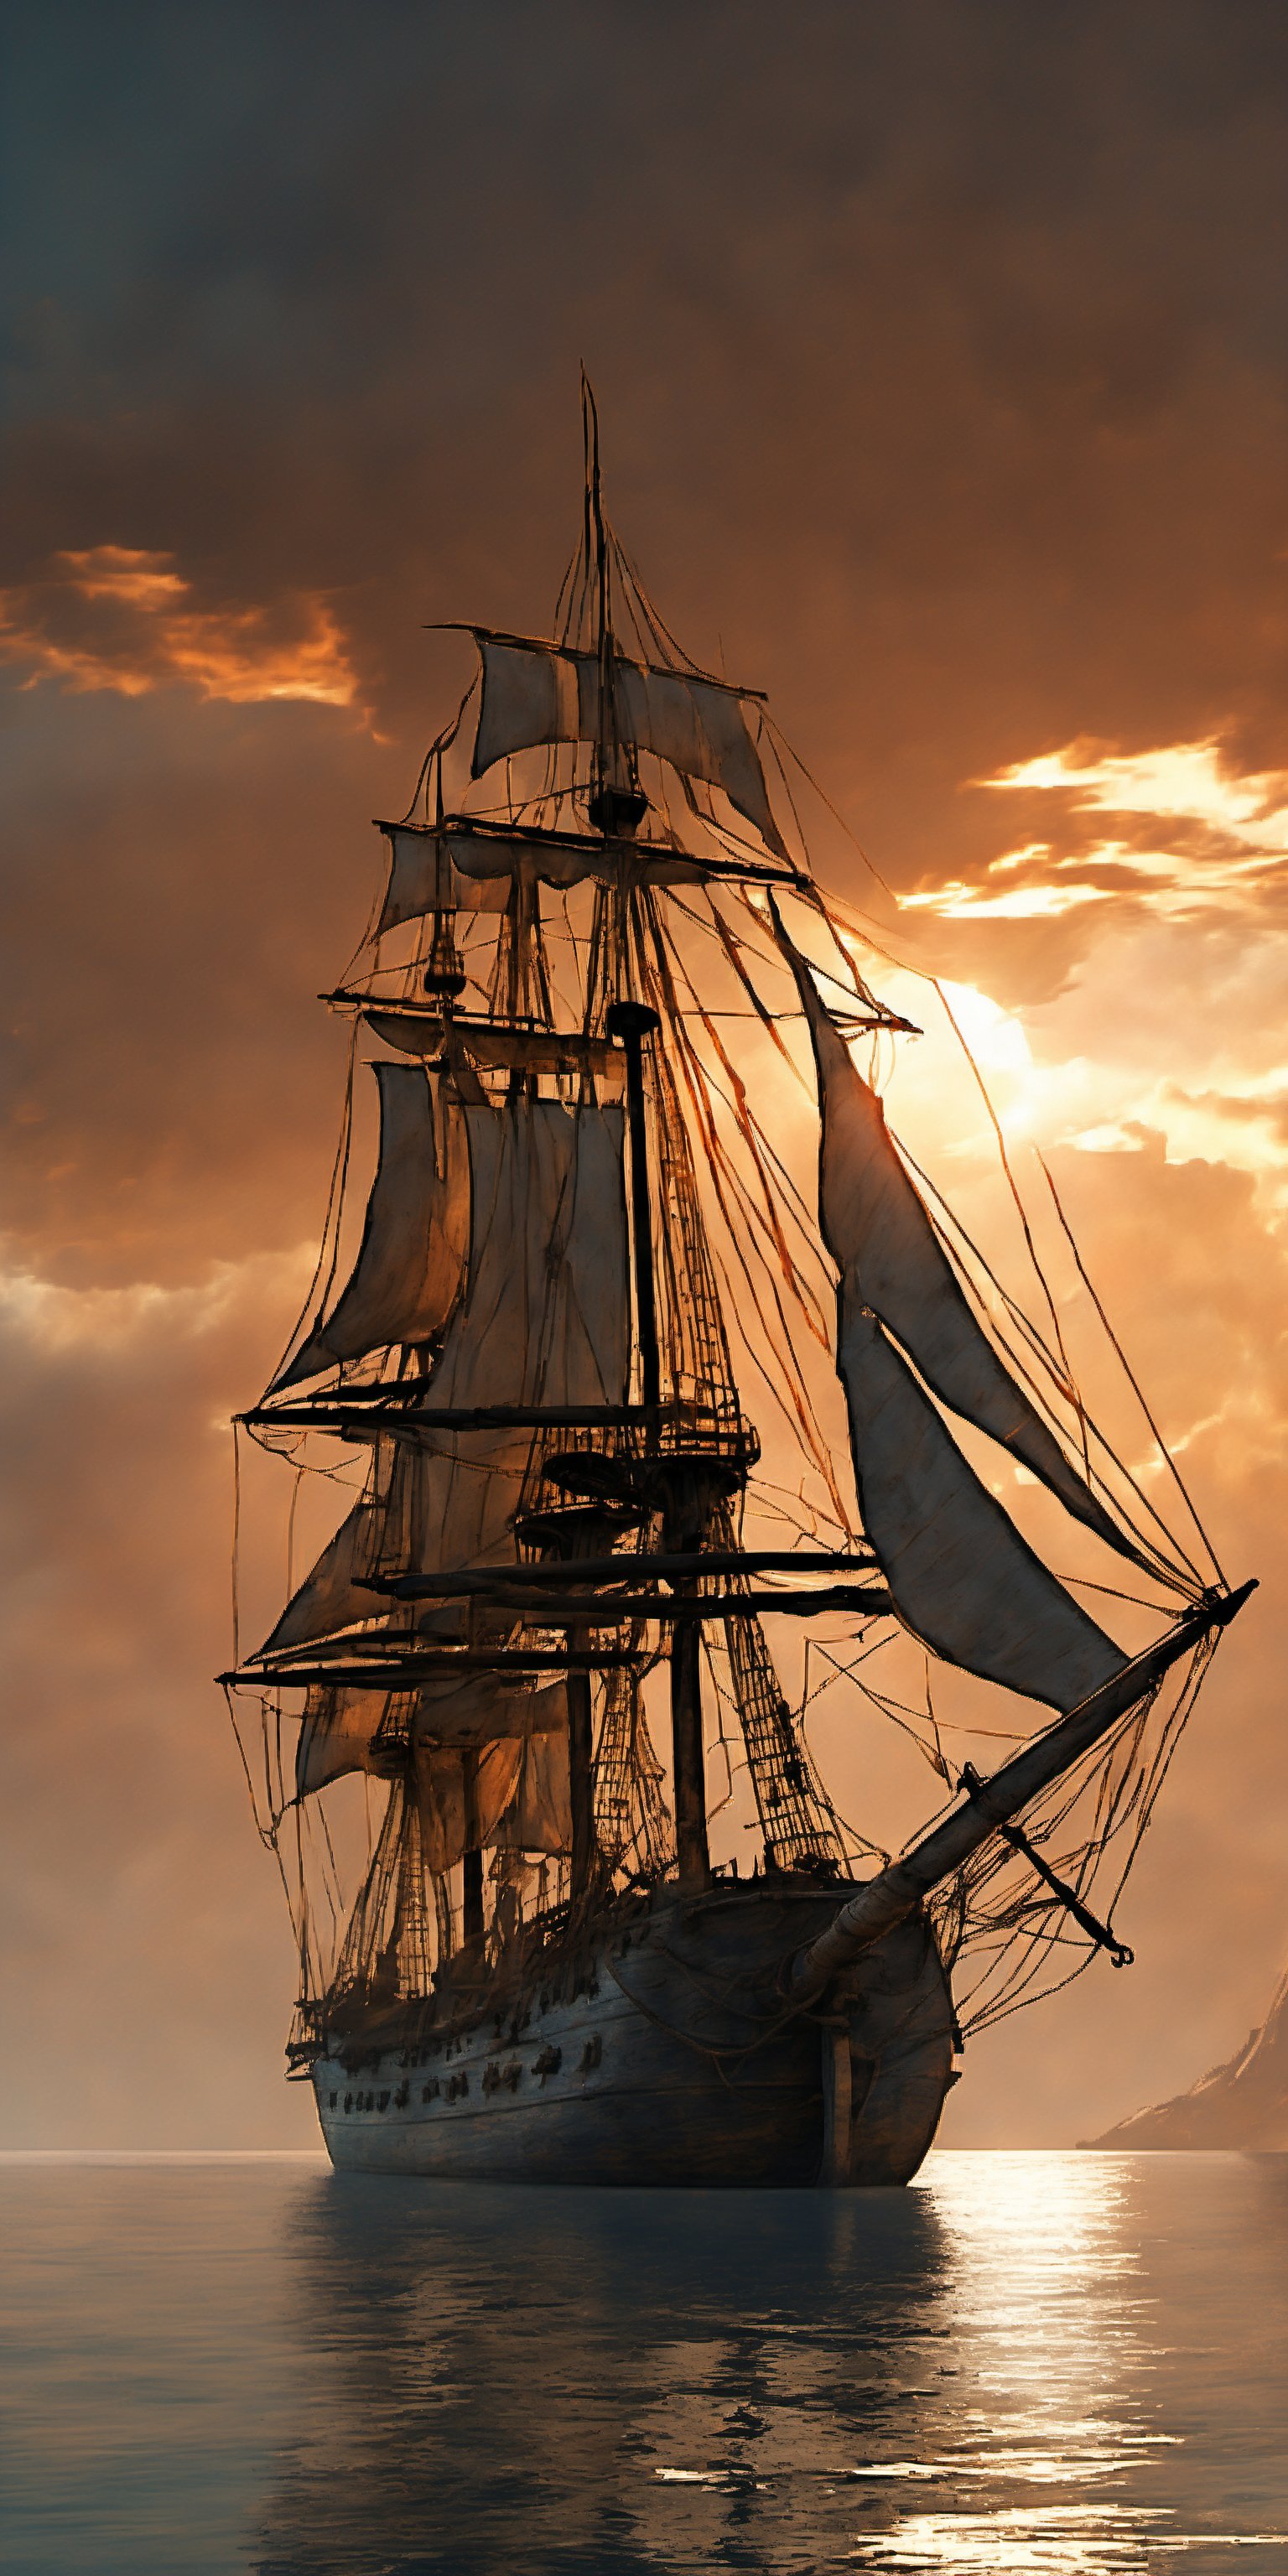 "A majestic old sailing ship with multiple masts and tattered sails, prominently positioned in the foreground on calm waters. The dramatic sky in the background features a smooth transition from deep oranges to soft blues, suggesting a warm sunrise or sunset. The ship’s weathered texture is highlighted by the warm glow of the sky, with more pronounced rusty hues on the ship’s surface. Smaller vessels are visible in the distance, adding depth to the scene. The overall atmosphere is both nostalgic and grand, with pronounced reflections of the sky’s colors in the water. Add a hazy, diffuse glow to enhance the mystical and somewhat dystopian feel. Ensure the lighting is slightly warmer to enhance the nostalgic effect. Unreal Engine, Octane Render, Hyper Realistic, Cinematic, Epic, Matte Painting."